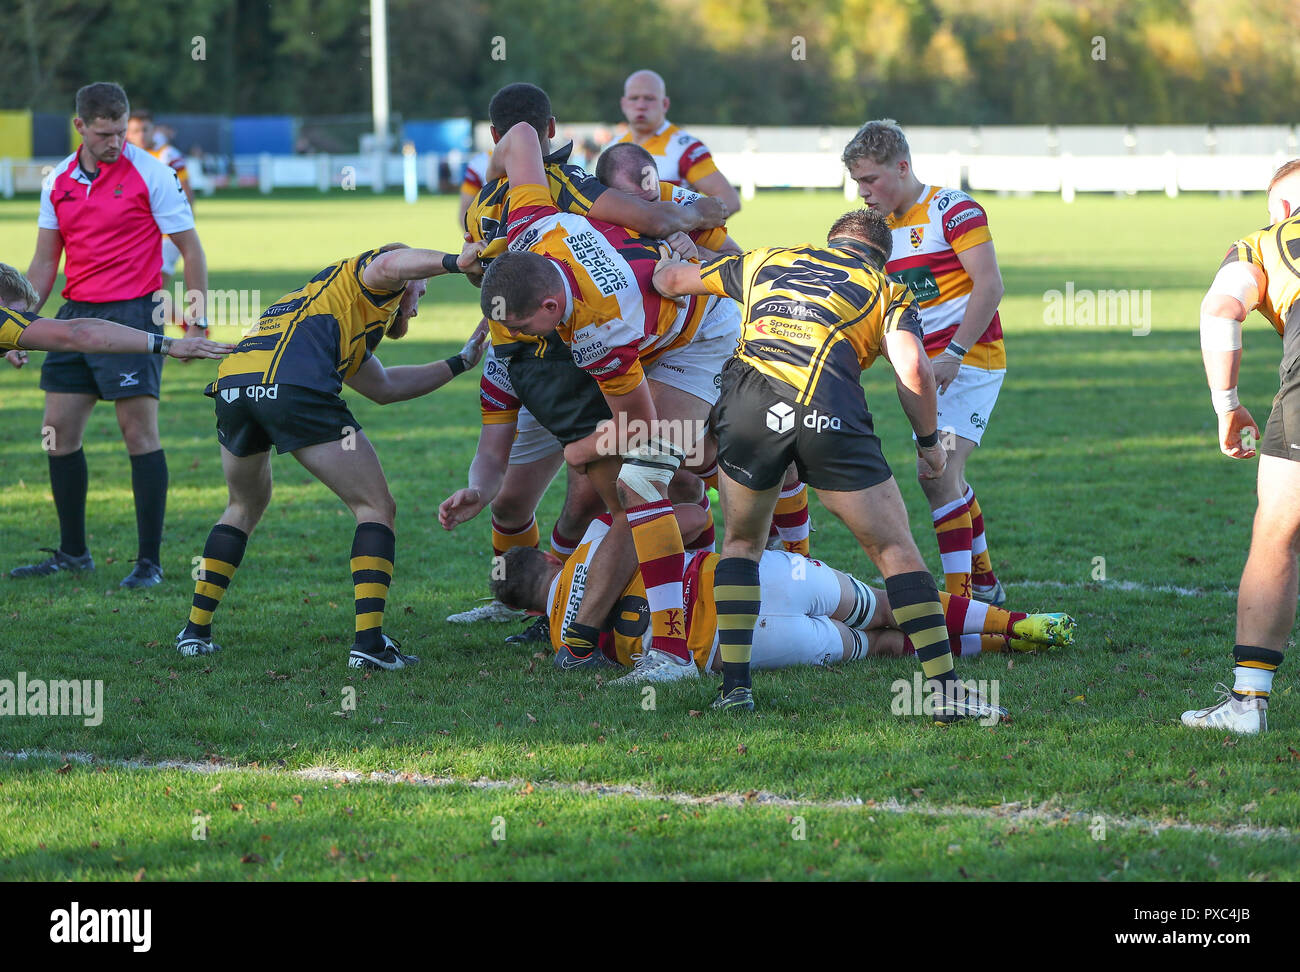 20.10.2018 Hinckley, Leicester, England. Rugby Union, Hinckley rfc v Fylde rfc.  Fylde forwards attack the Hinckley line during the RFU National League 2 North (NL2N) game played at the Leicester  Road Stadium.    © Phil Hutchinson / Alamy Live News Stock Photo